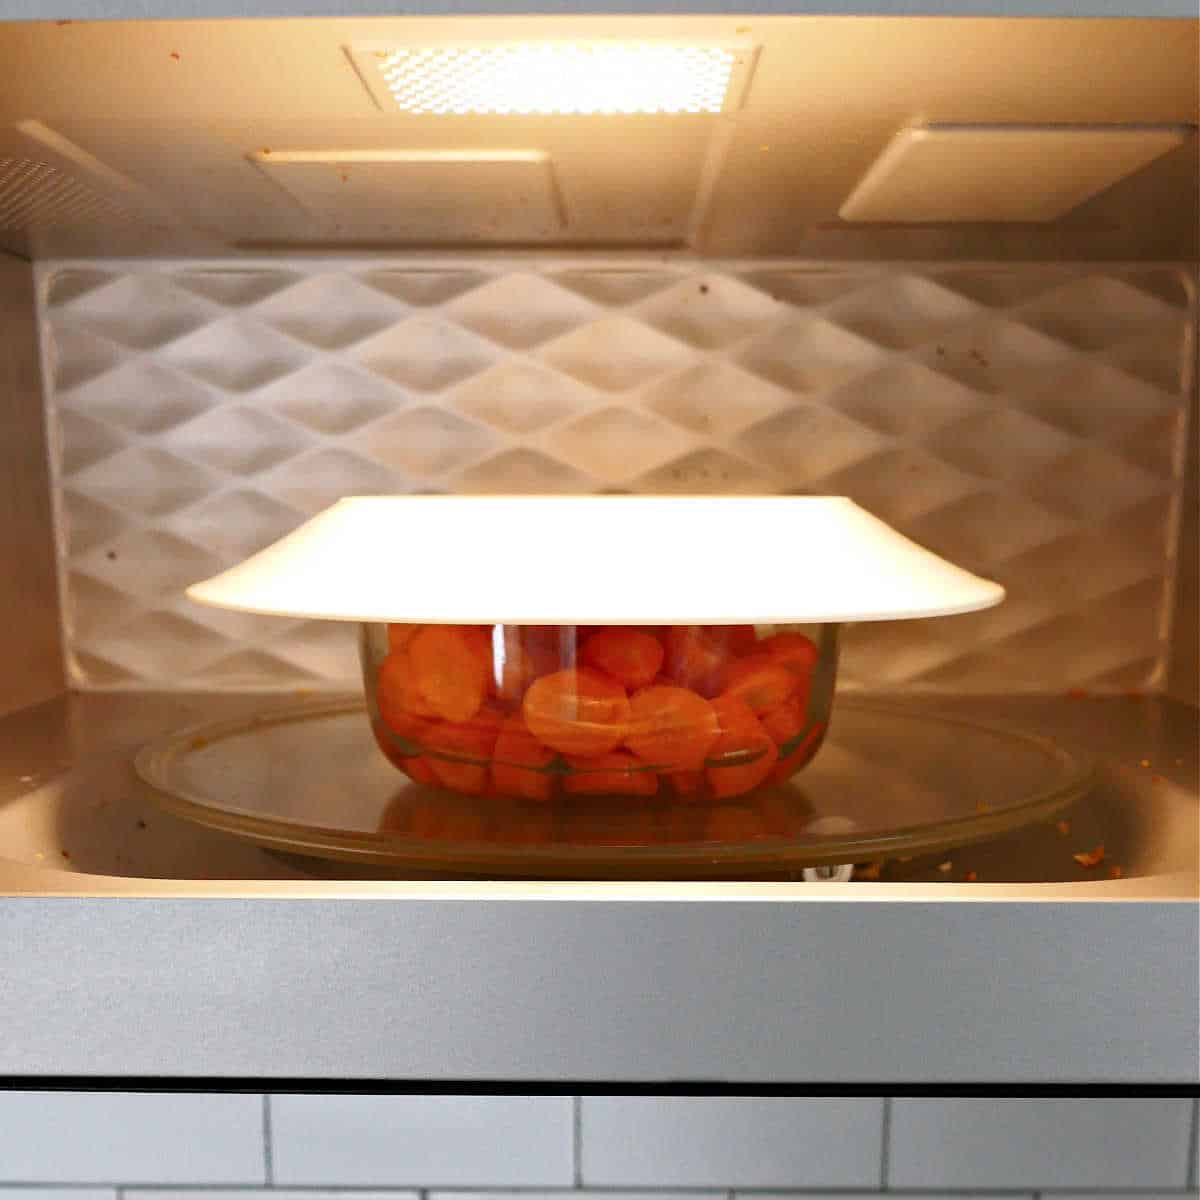 carrots in a bowl with a plate on top in the microwave